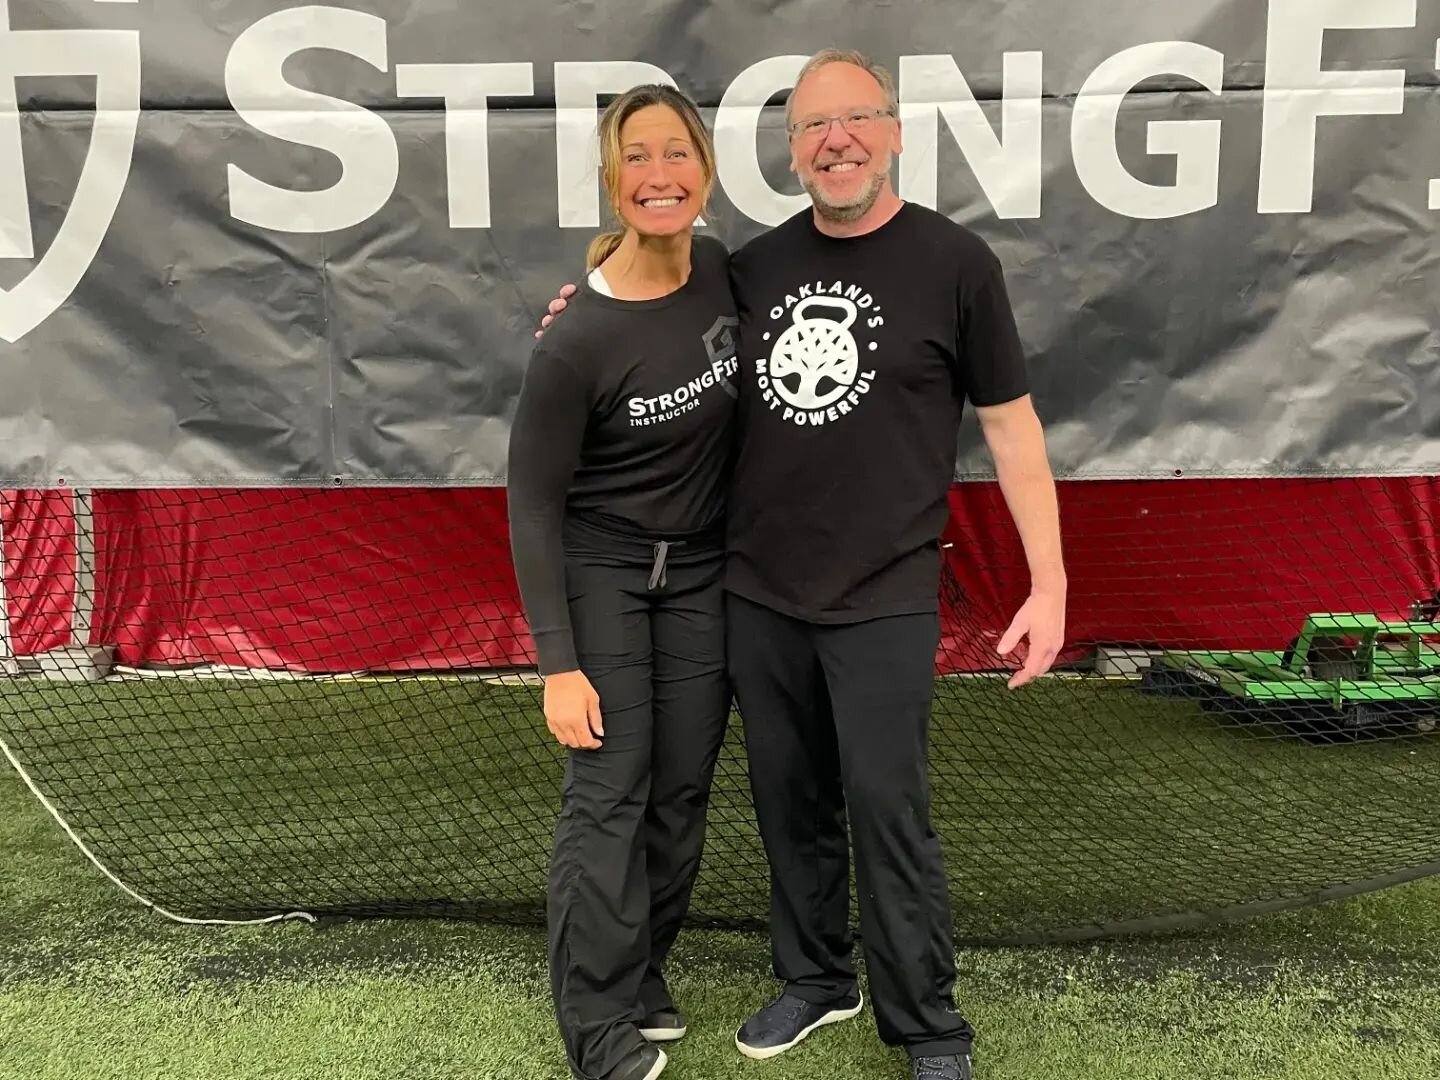 From Strong Start to StrongFirst 

Our Student's journey from Strong Start to Strong First Level 1 Certification has been amazing to be a part of. We've only worked with Dave remotely (online through Zoom &amp; Discord) from Idaho! He's shown up to c